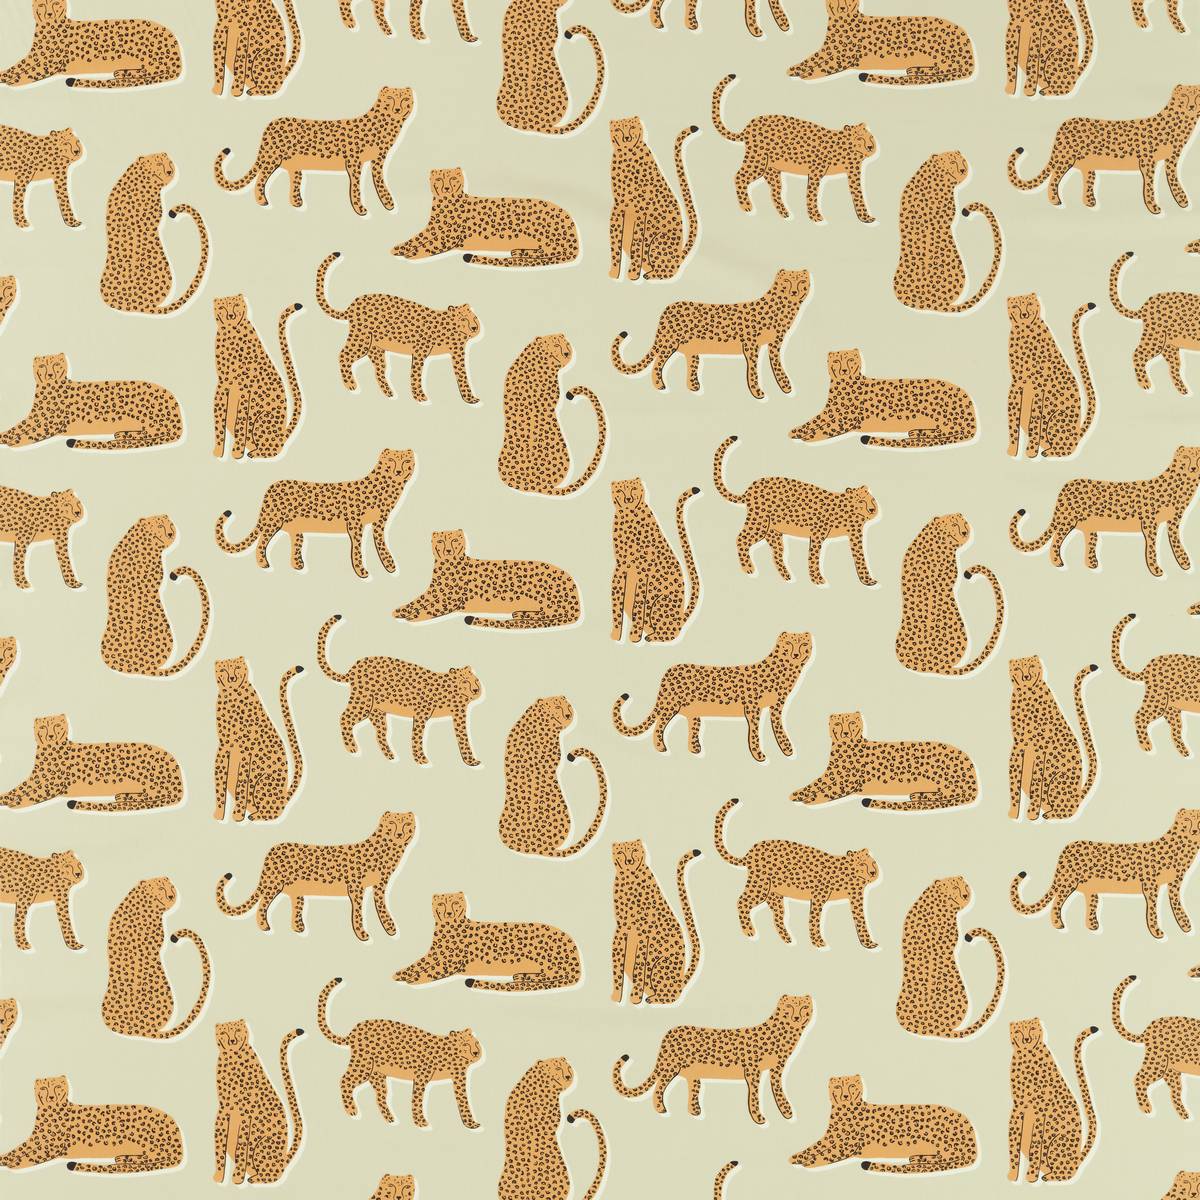 Lionel Ginger Fabric by Scion